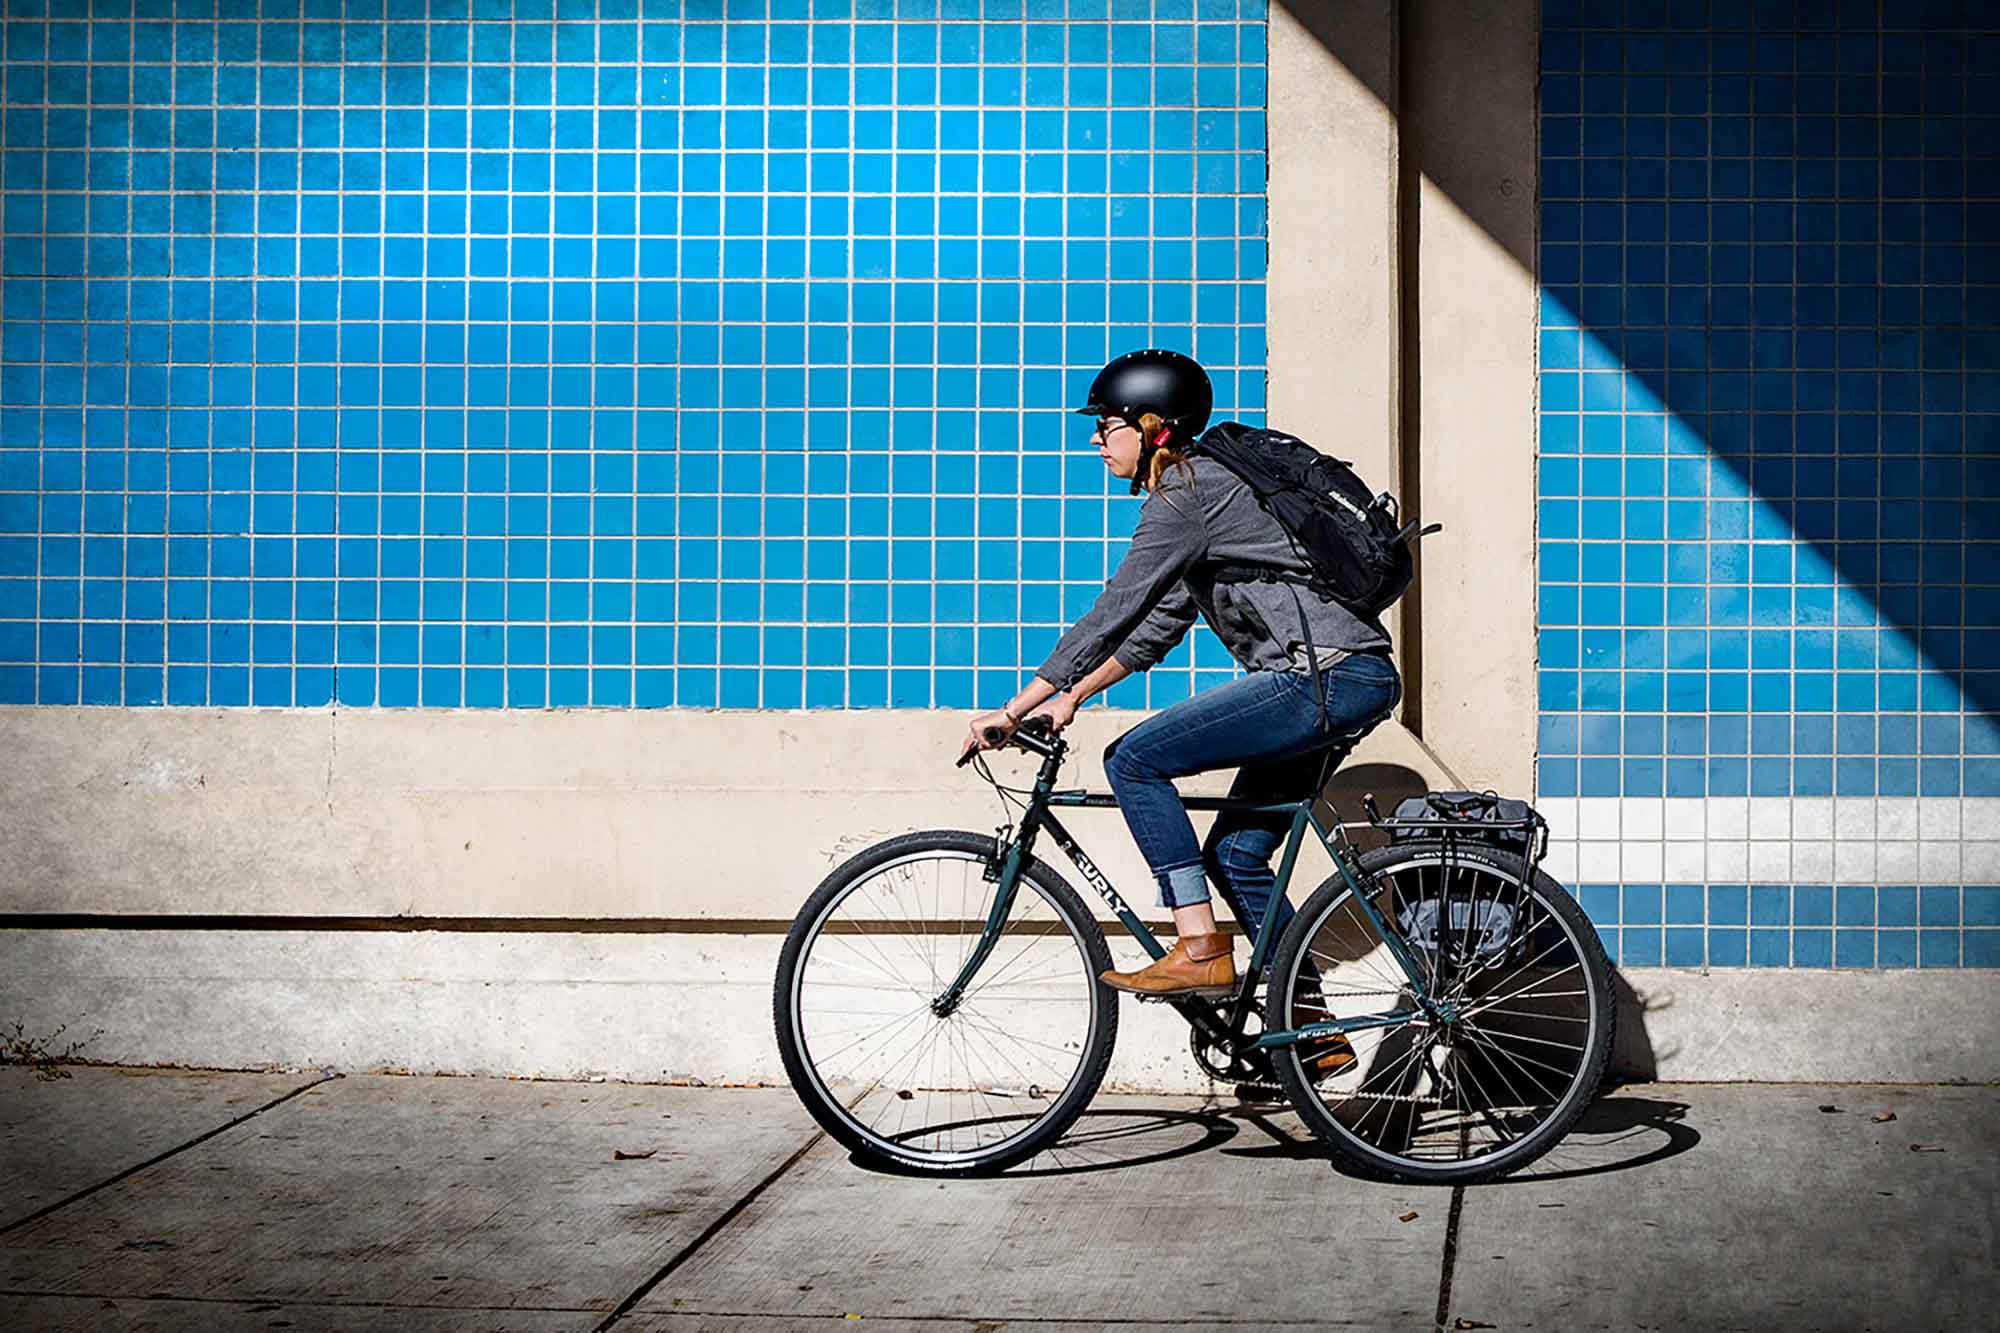 Cyclist rides a Surly bike on a sidewalk alongside a building with blue tiles on it